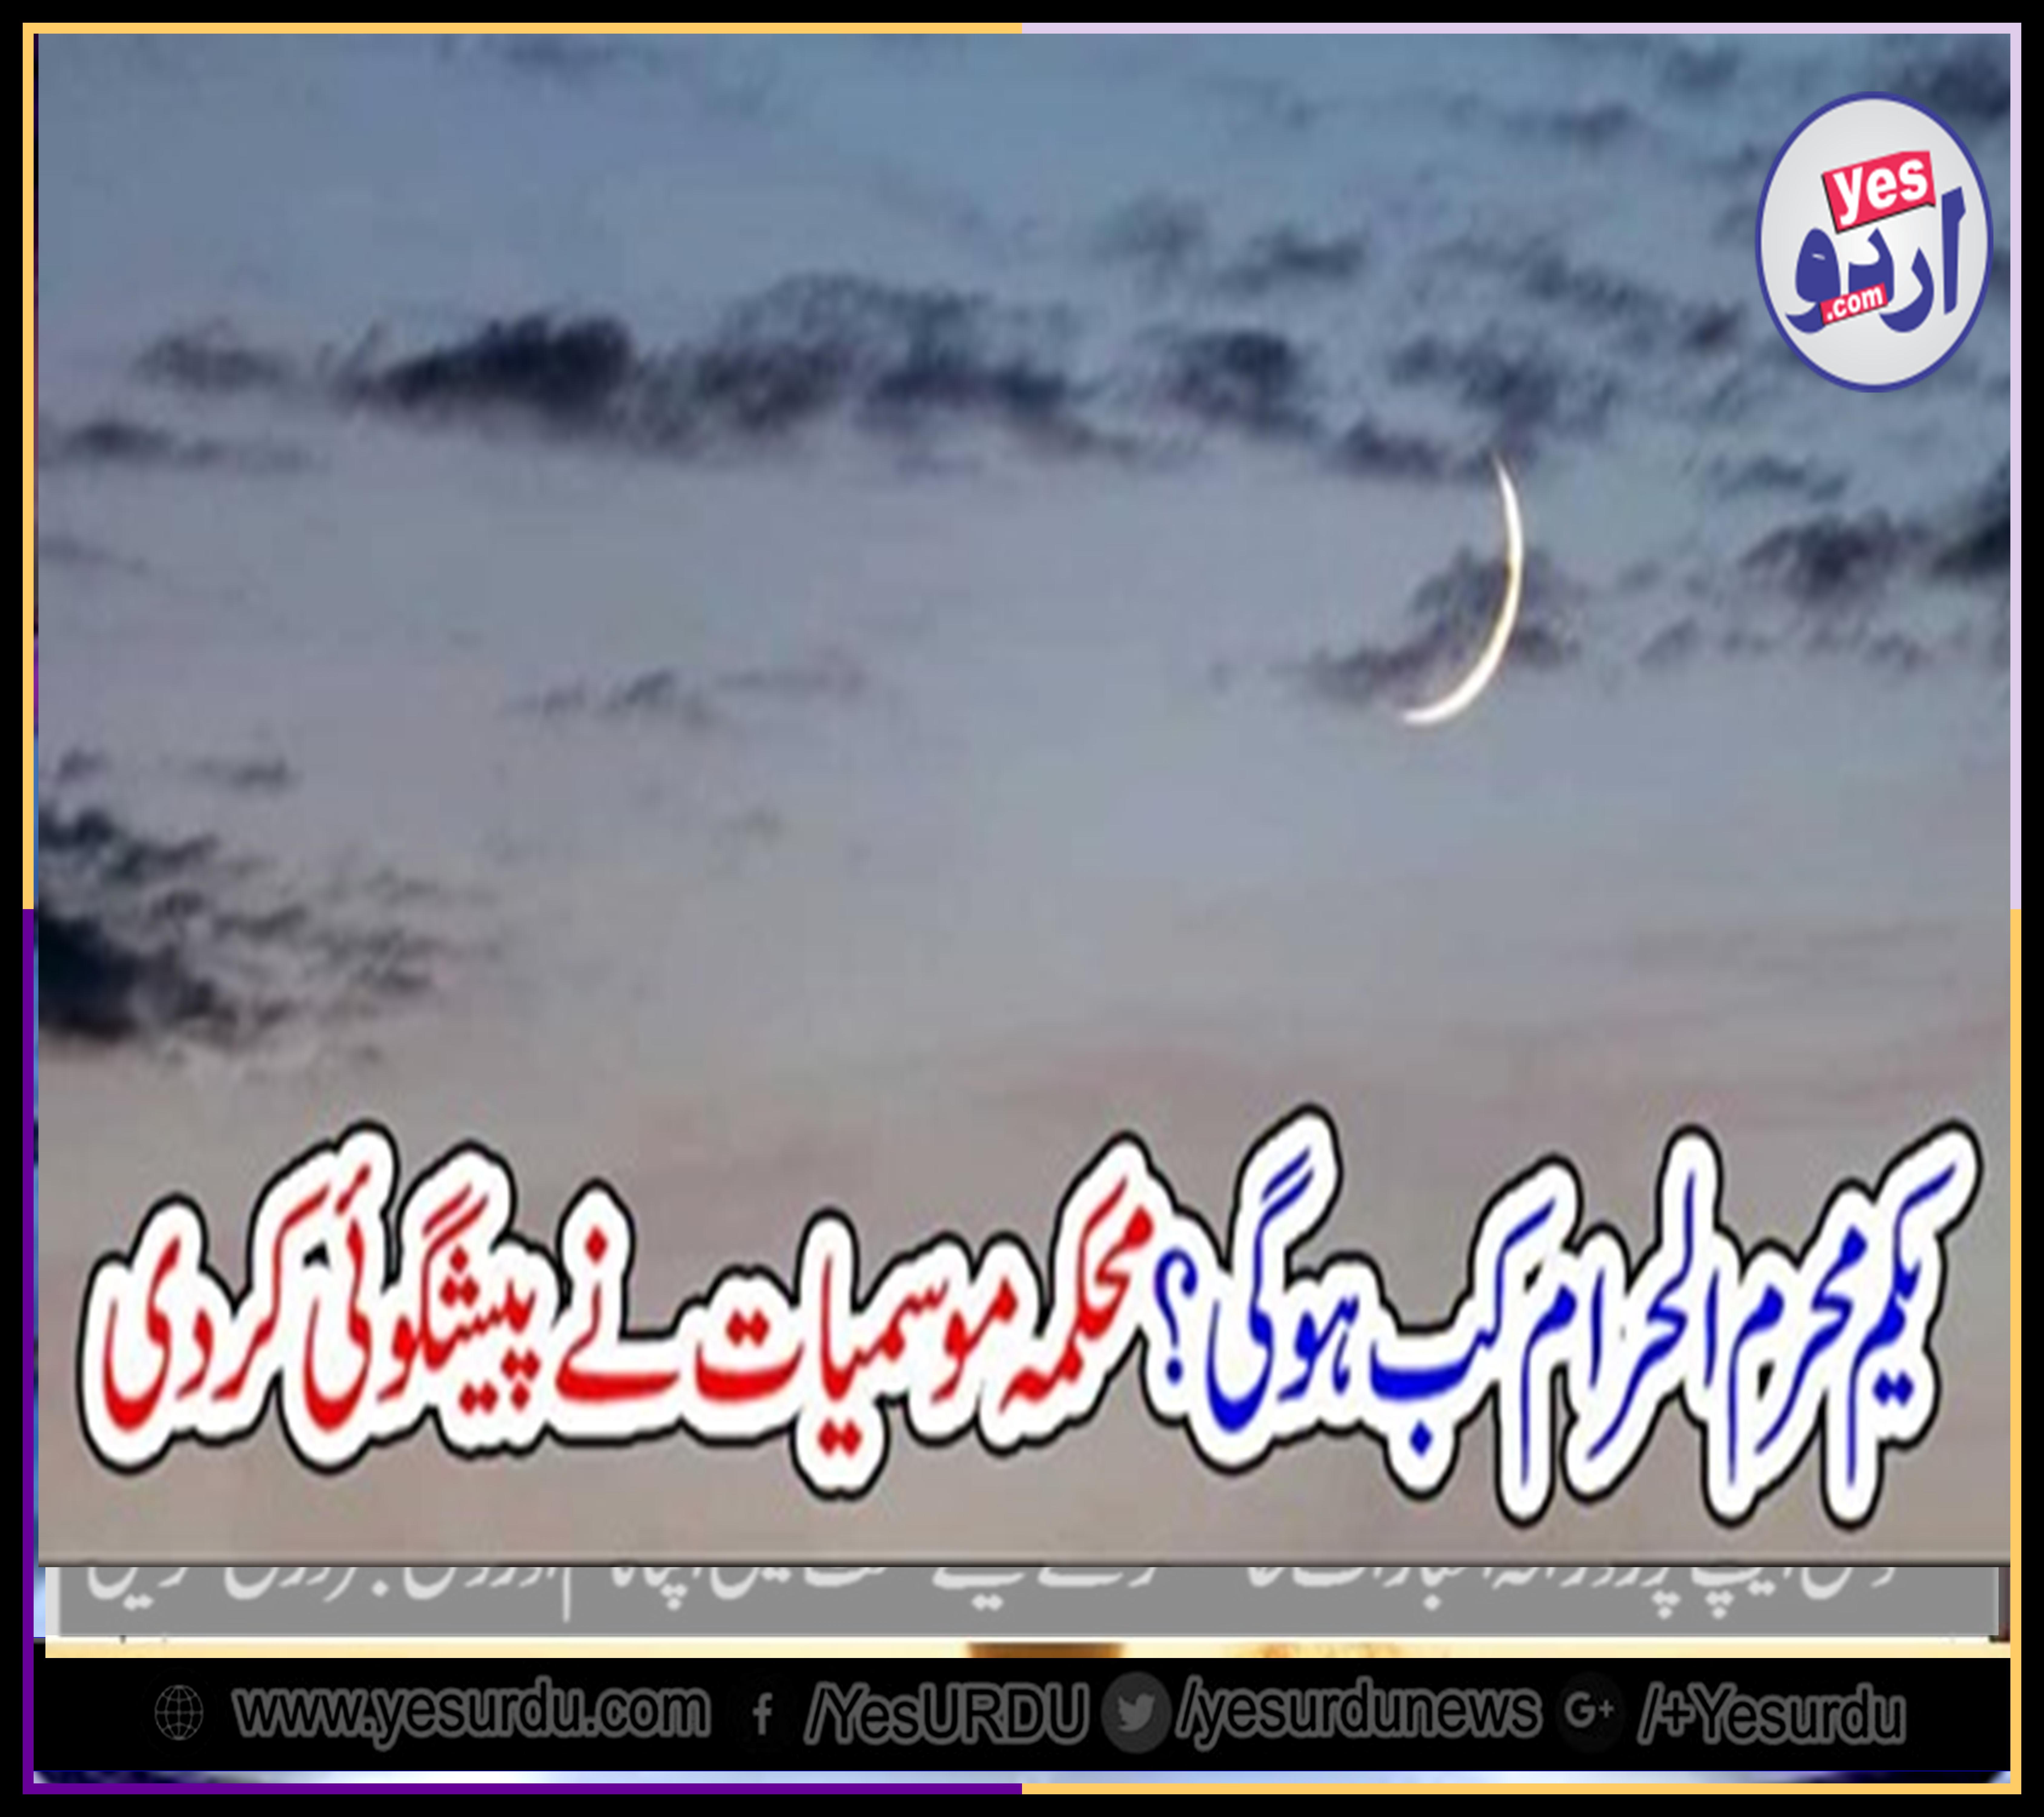 when, will, be, the, first, of, Moharram, 2019, weather, forecast, announced, the, first, of, Islamic, year